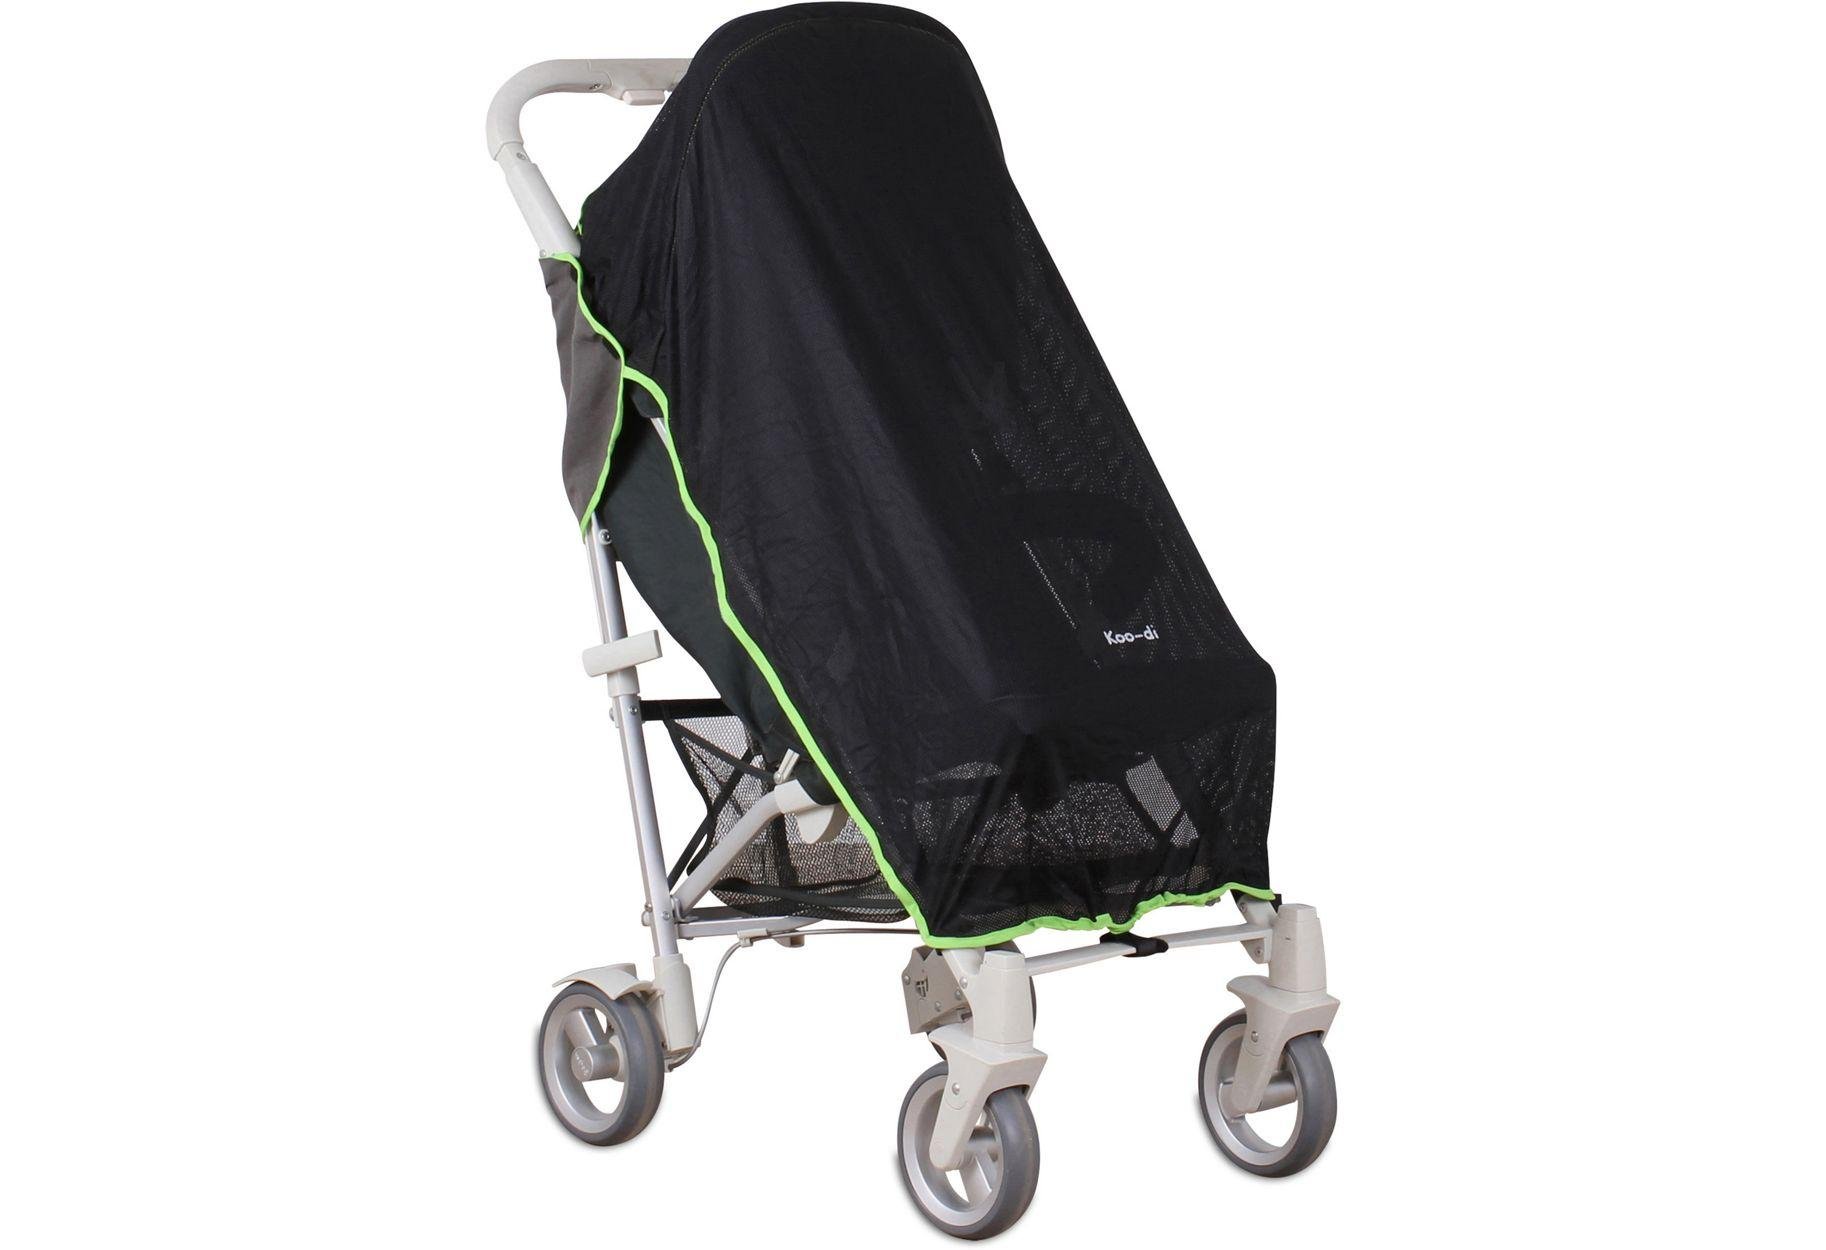 Koo-di Pack-It Sun and Sleep Pushchair Cover.